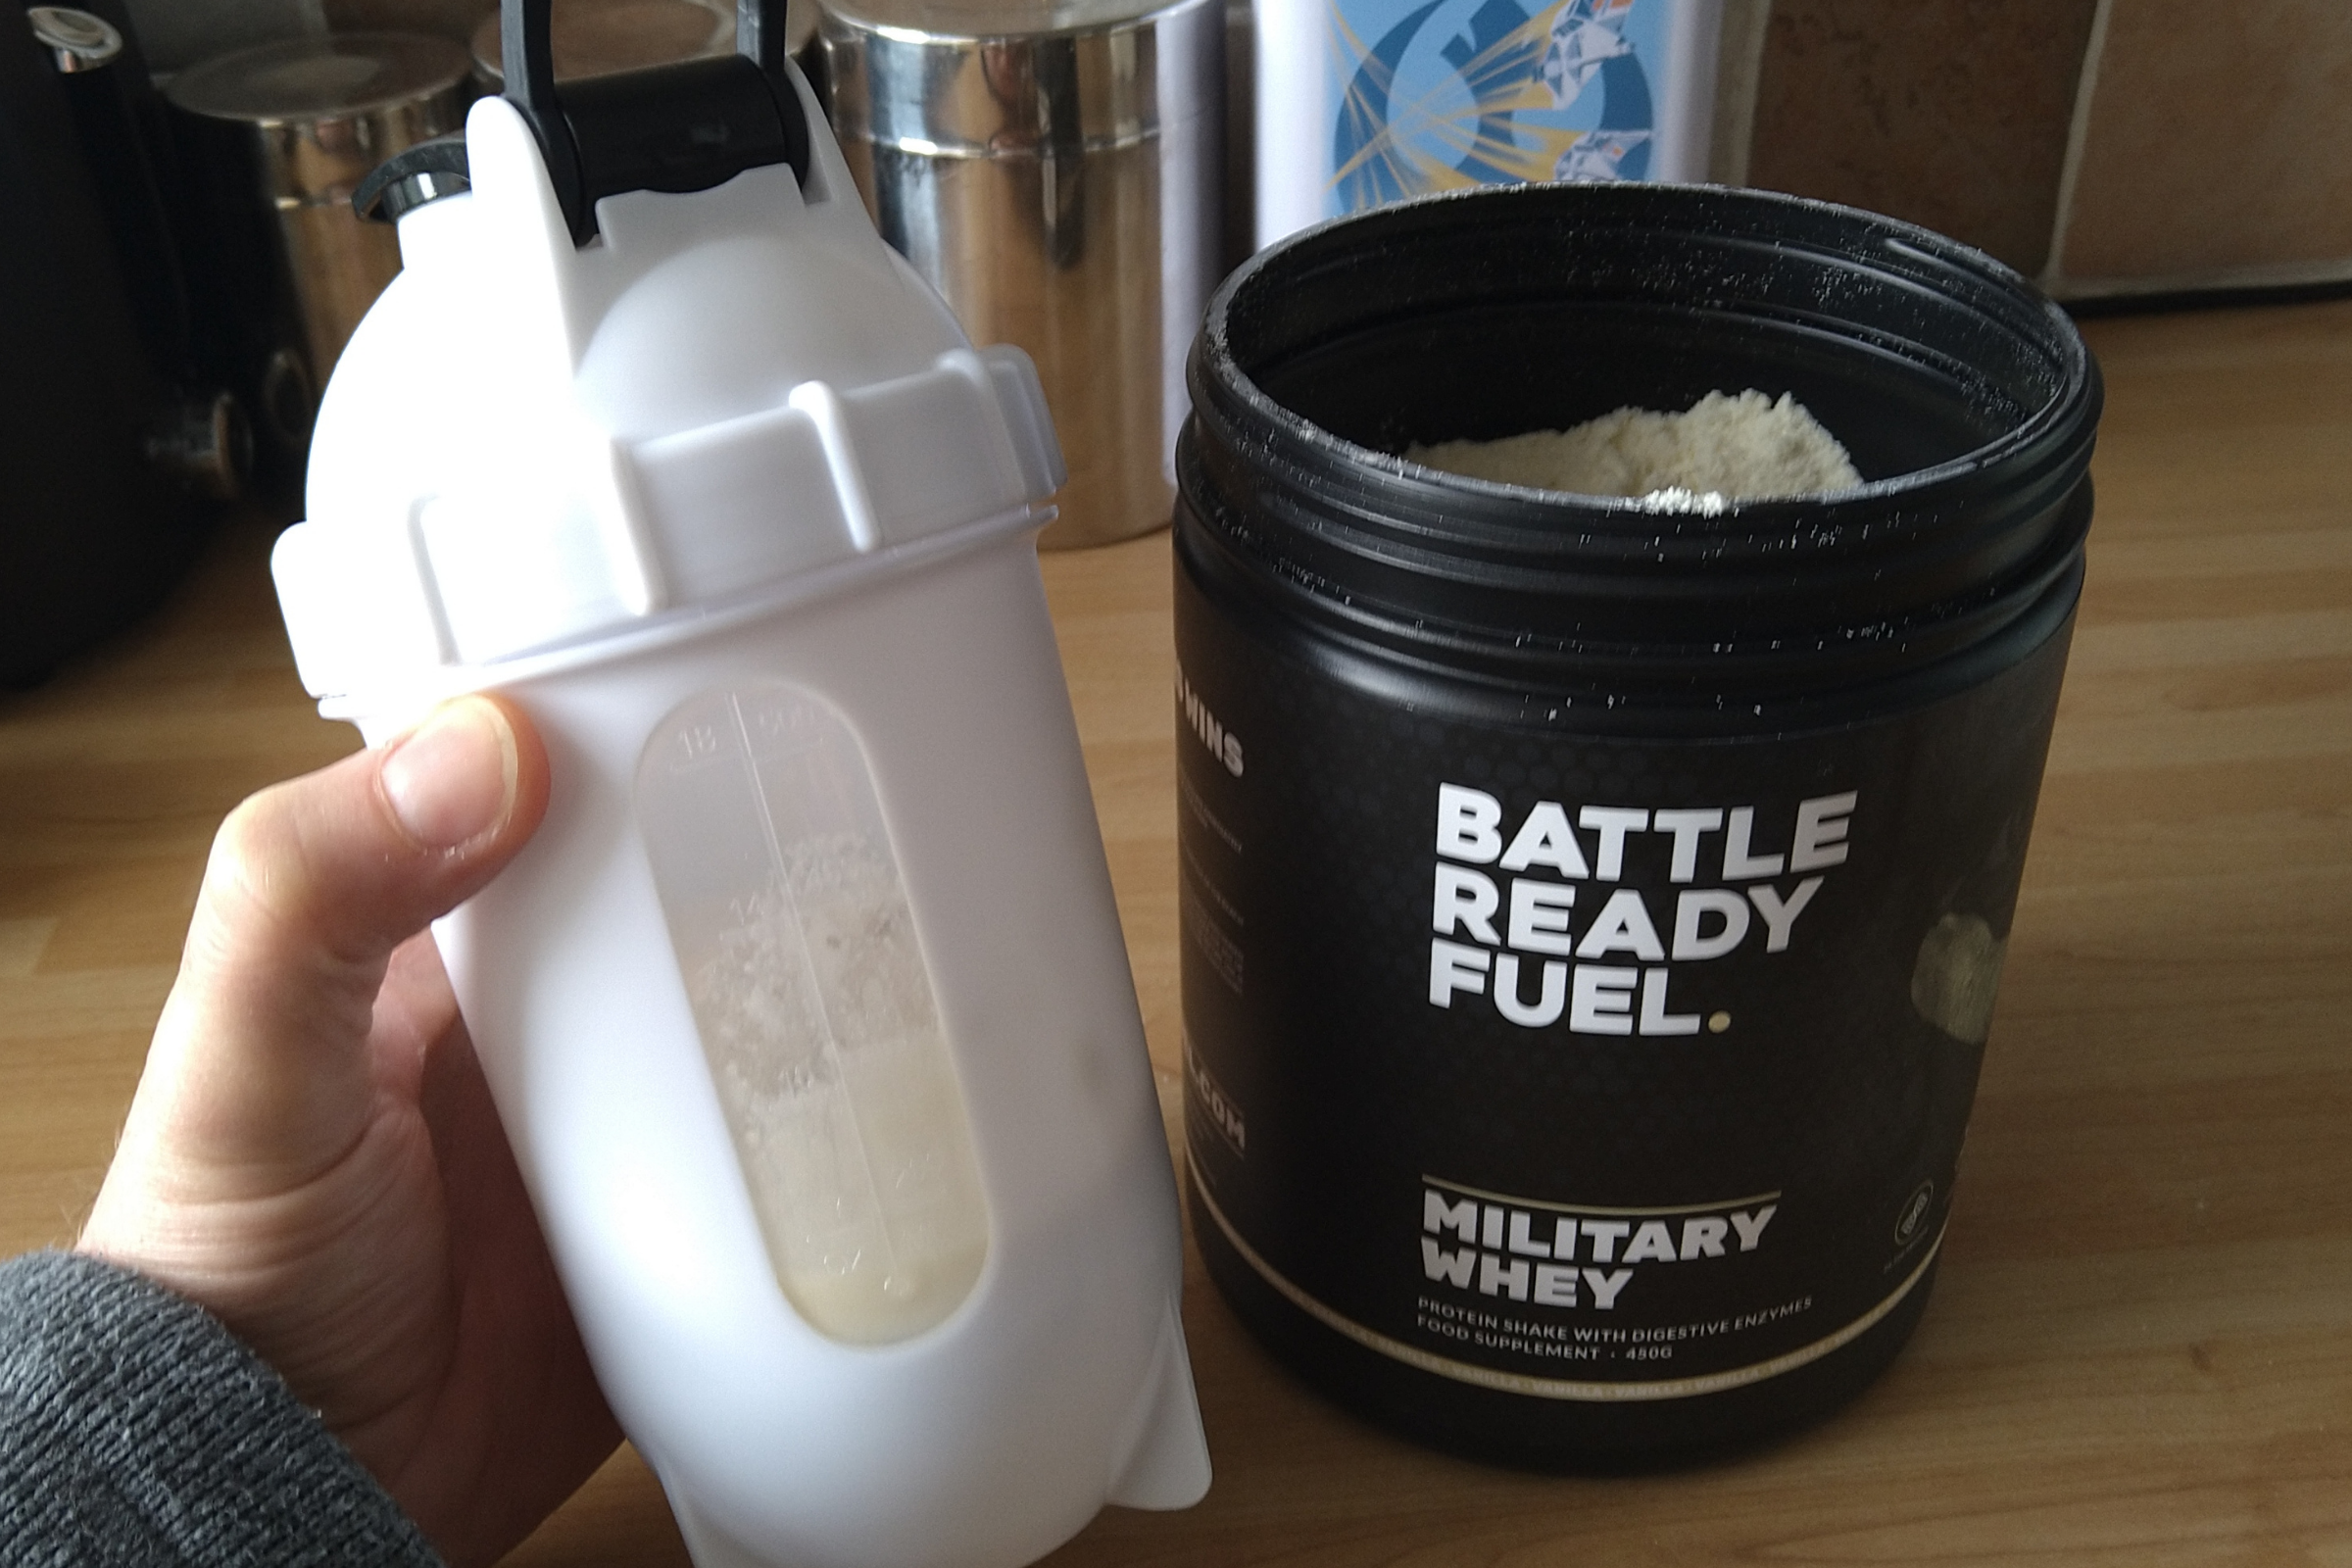 Battle Ready Fuel – Military Whey protein review